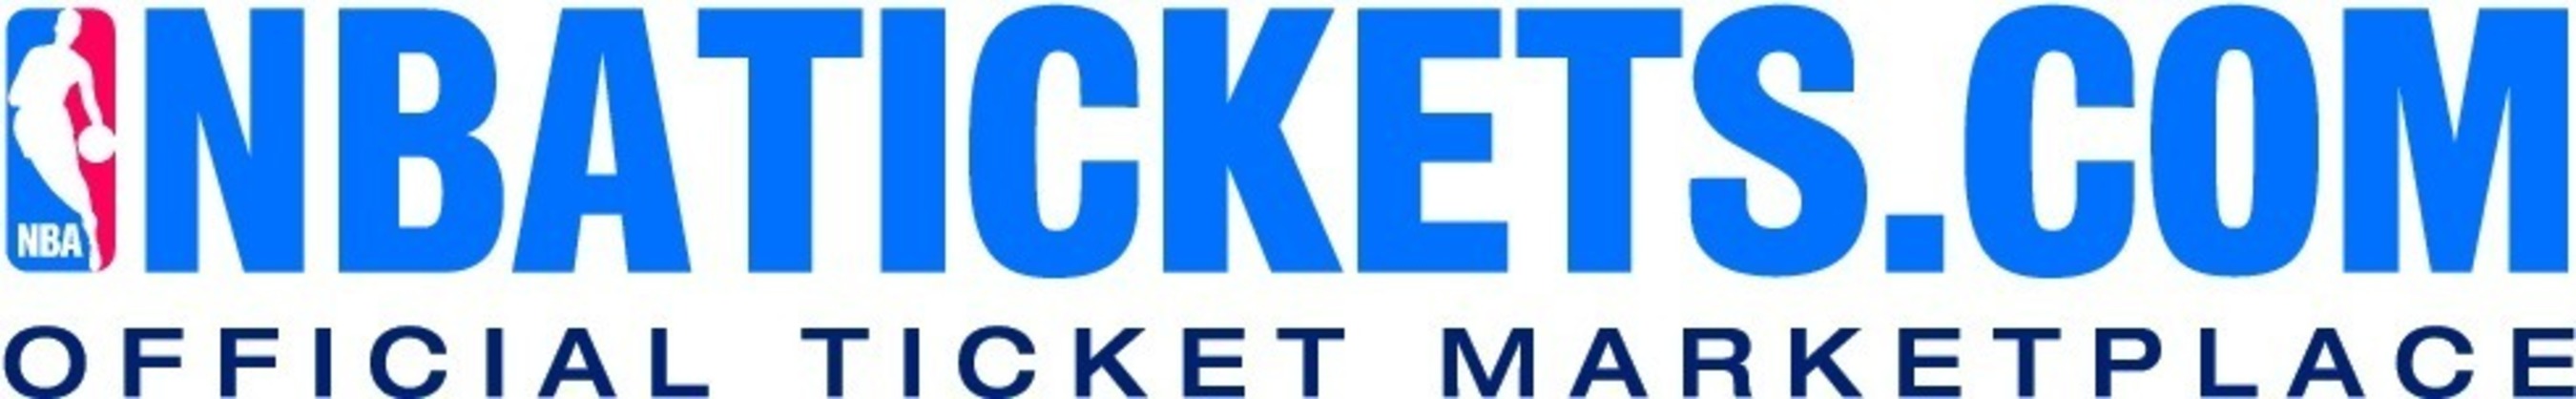 NBATICKETS.COM, THE ONLY OFFICIAL TICKET MARKETPLACE OF THE NBA, IS READY FOR NBA PLAYOFFS – WILL YOU BE THERE? NBATickets.com features Ticketmaster’s barcode verification technology enabling fans to buy NBA Playoff tickets with complete confidence. (PRNewsFoto/Ticketmaster)